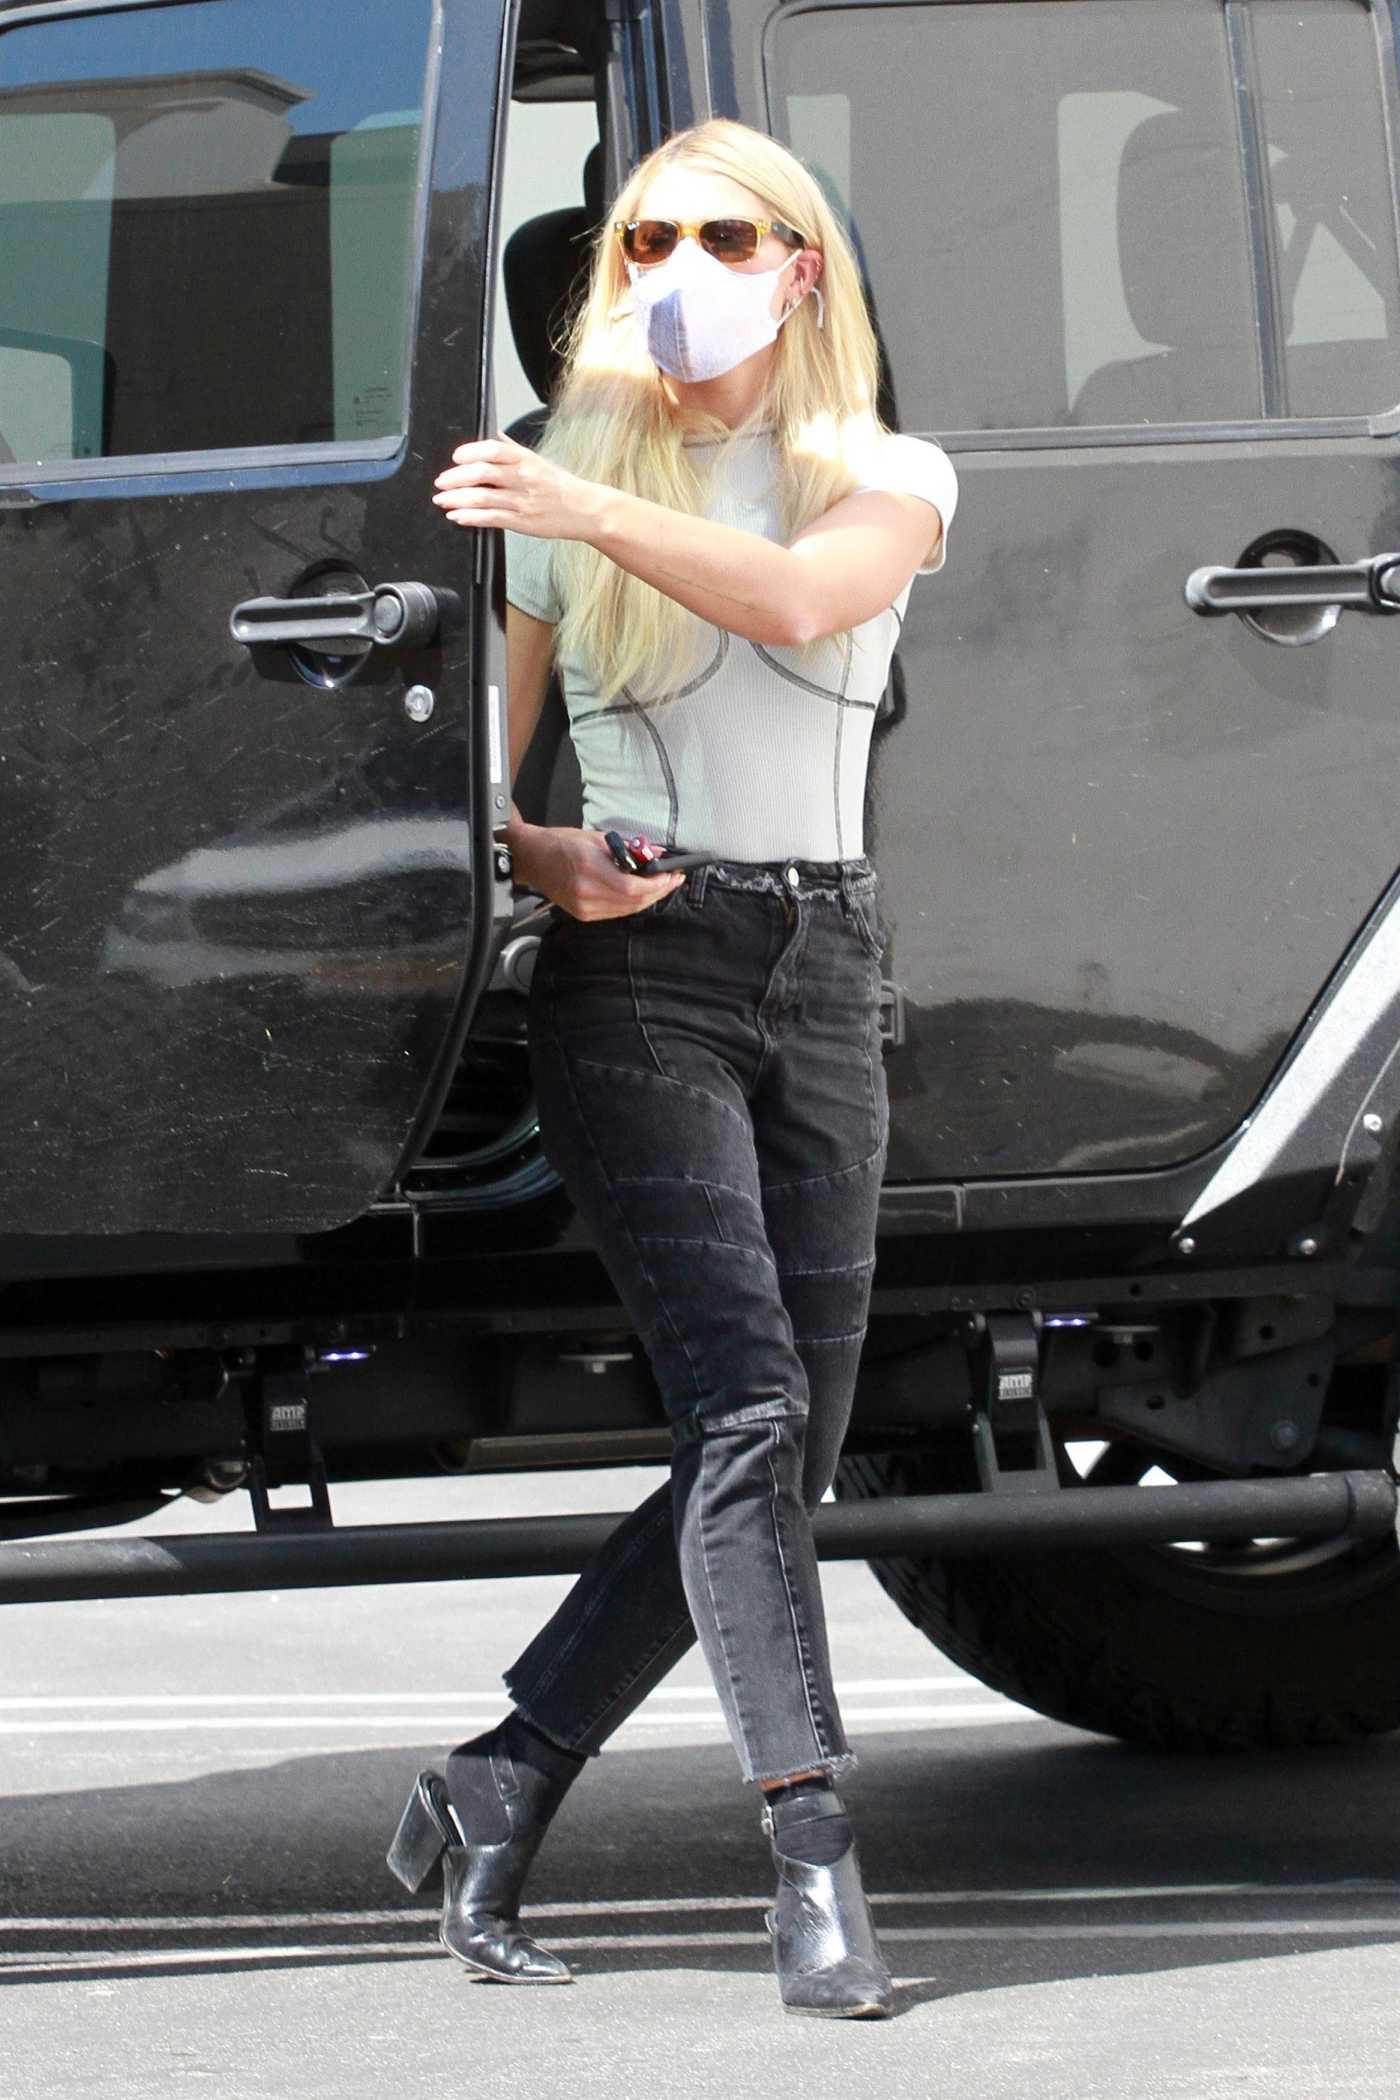 Emma Slater in a White Tee Attends the DWTS Studio in Los Angeles 09/30/2020